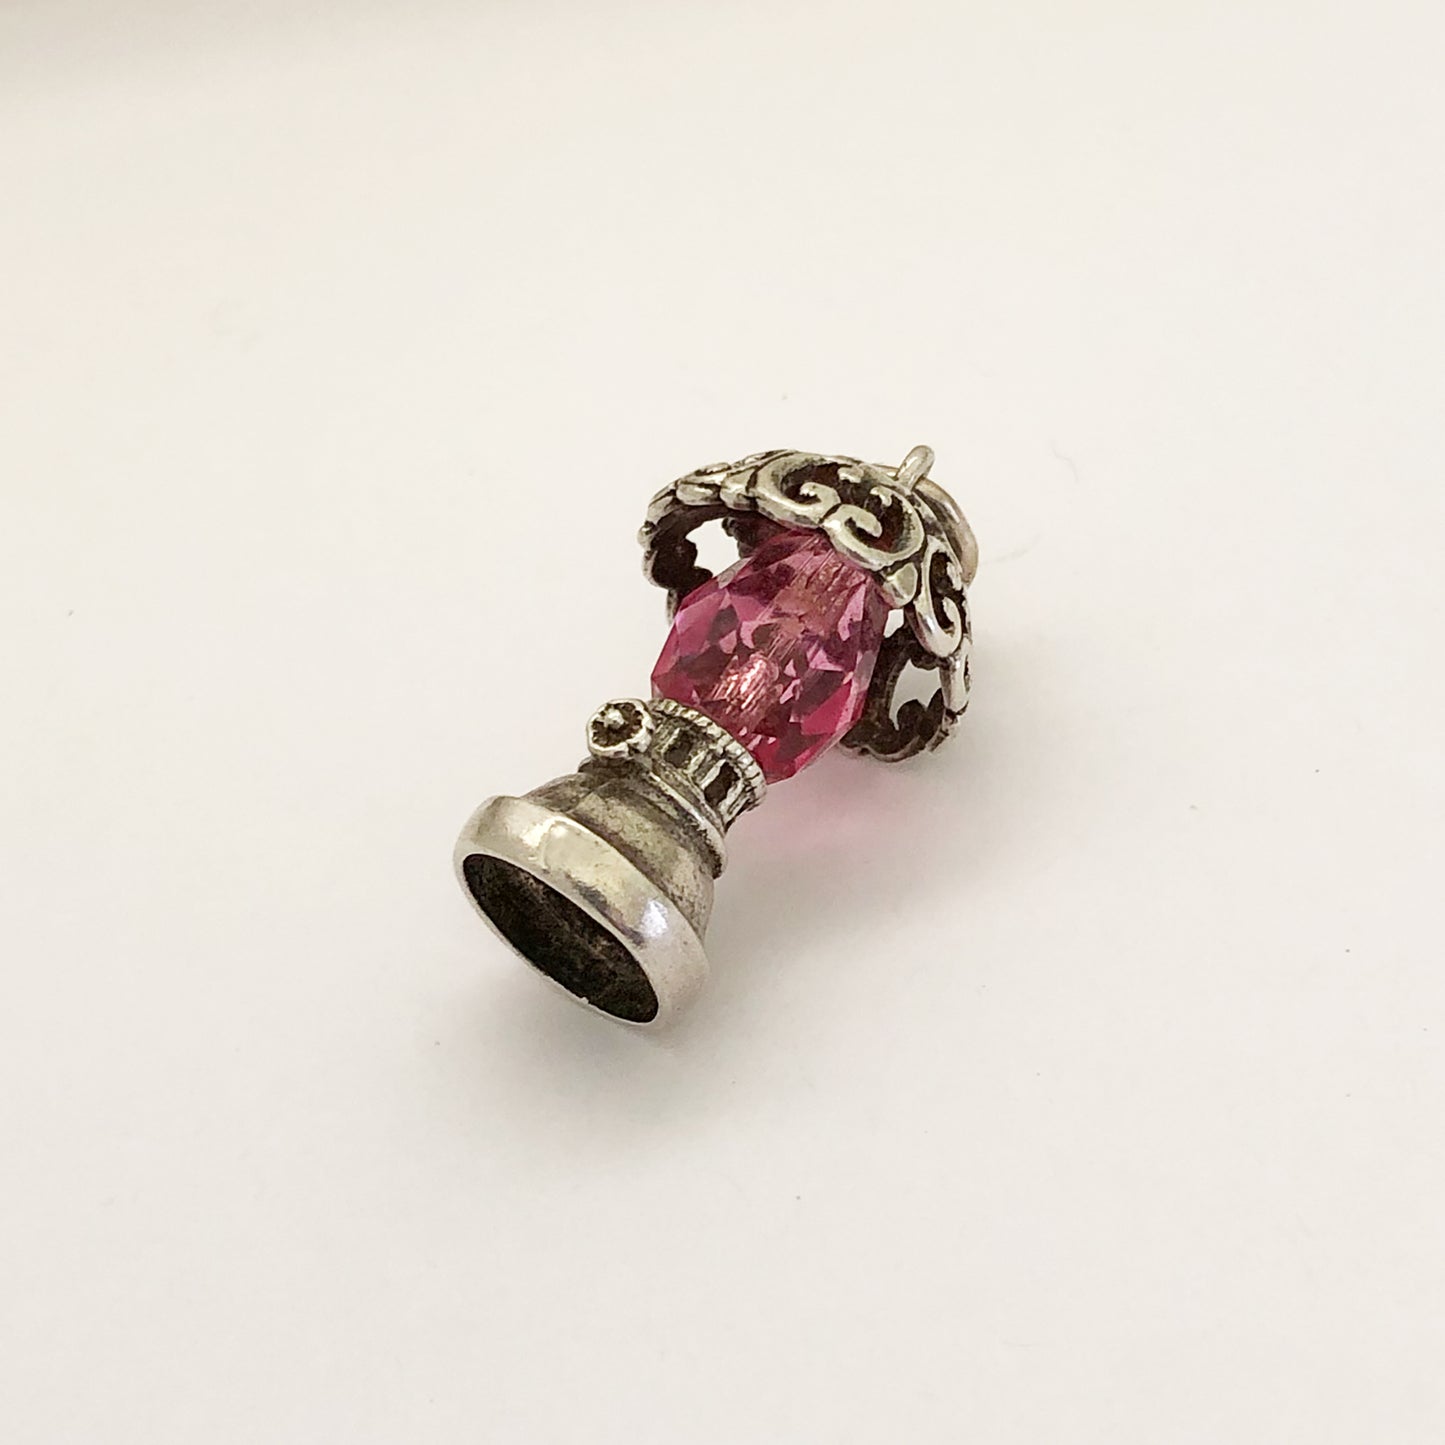 Vintage Silver Oil Lamp Charm with Pink Crystal